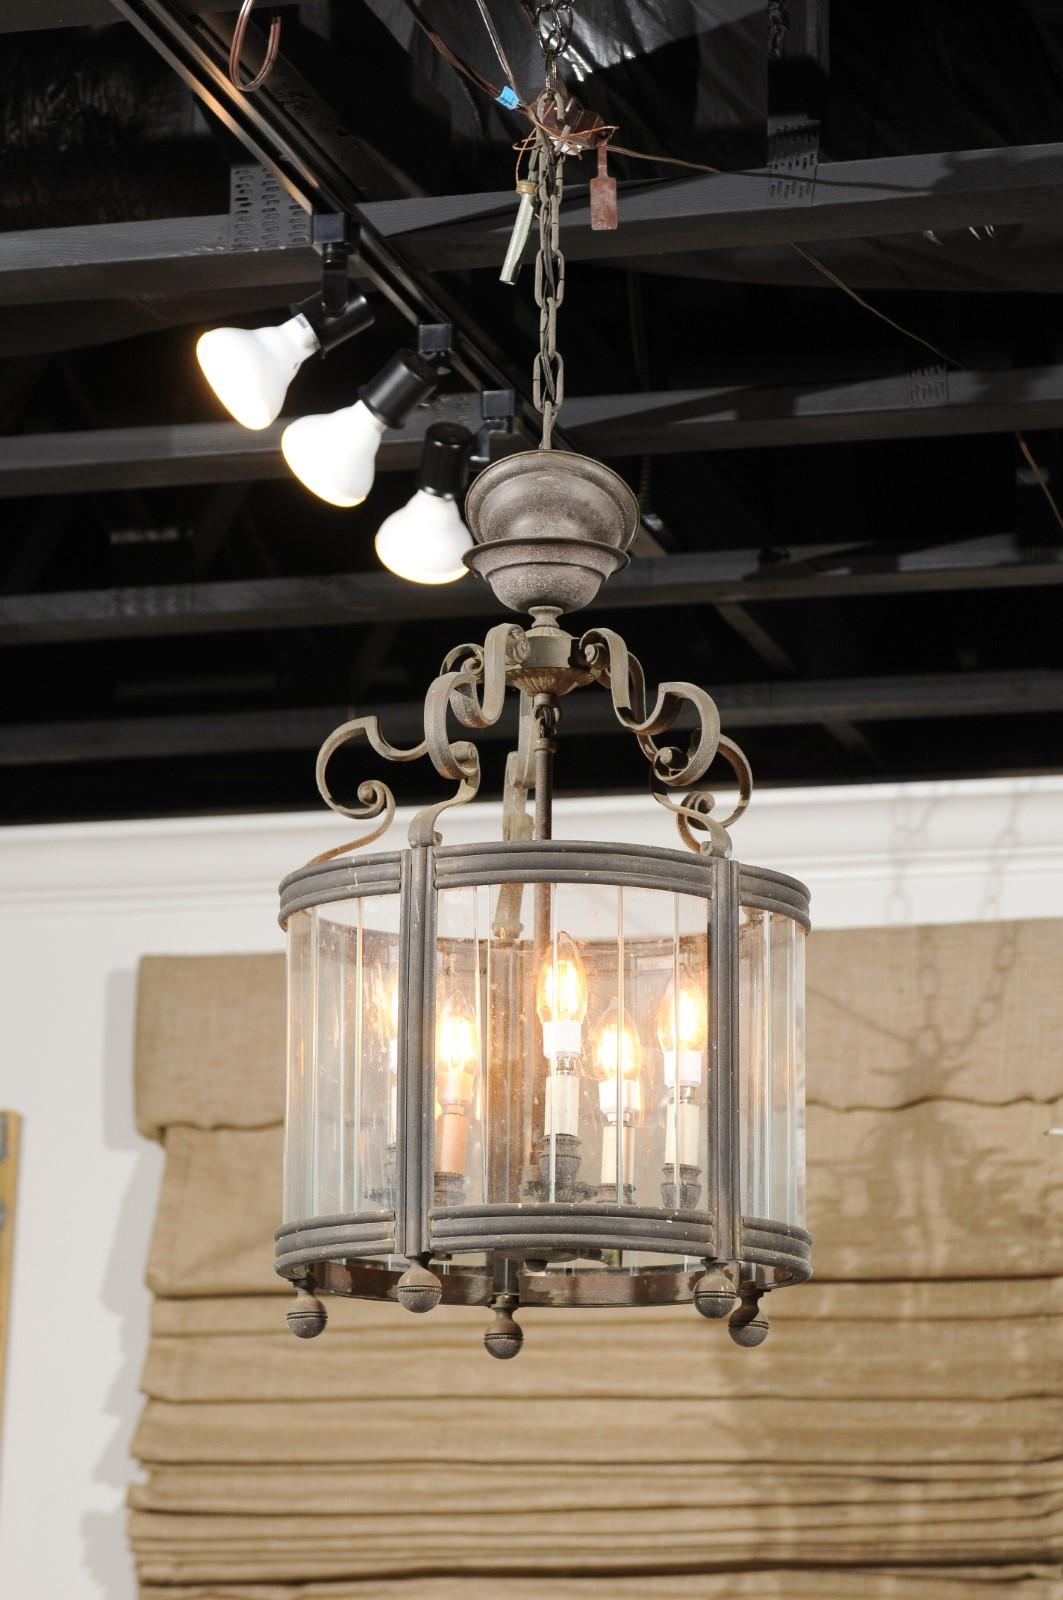 A French five-light iron lantern from the 19th century, with glass panels, scrolling accents and petite spheres. Born in France during the 19th century, this iron lantern features an iron structure topped with scrolling motifs connected to a central